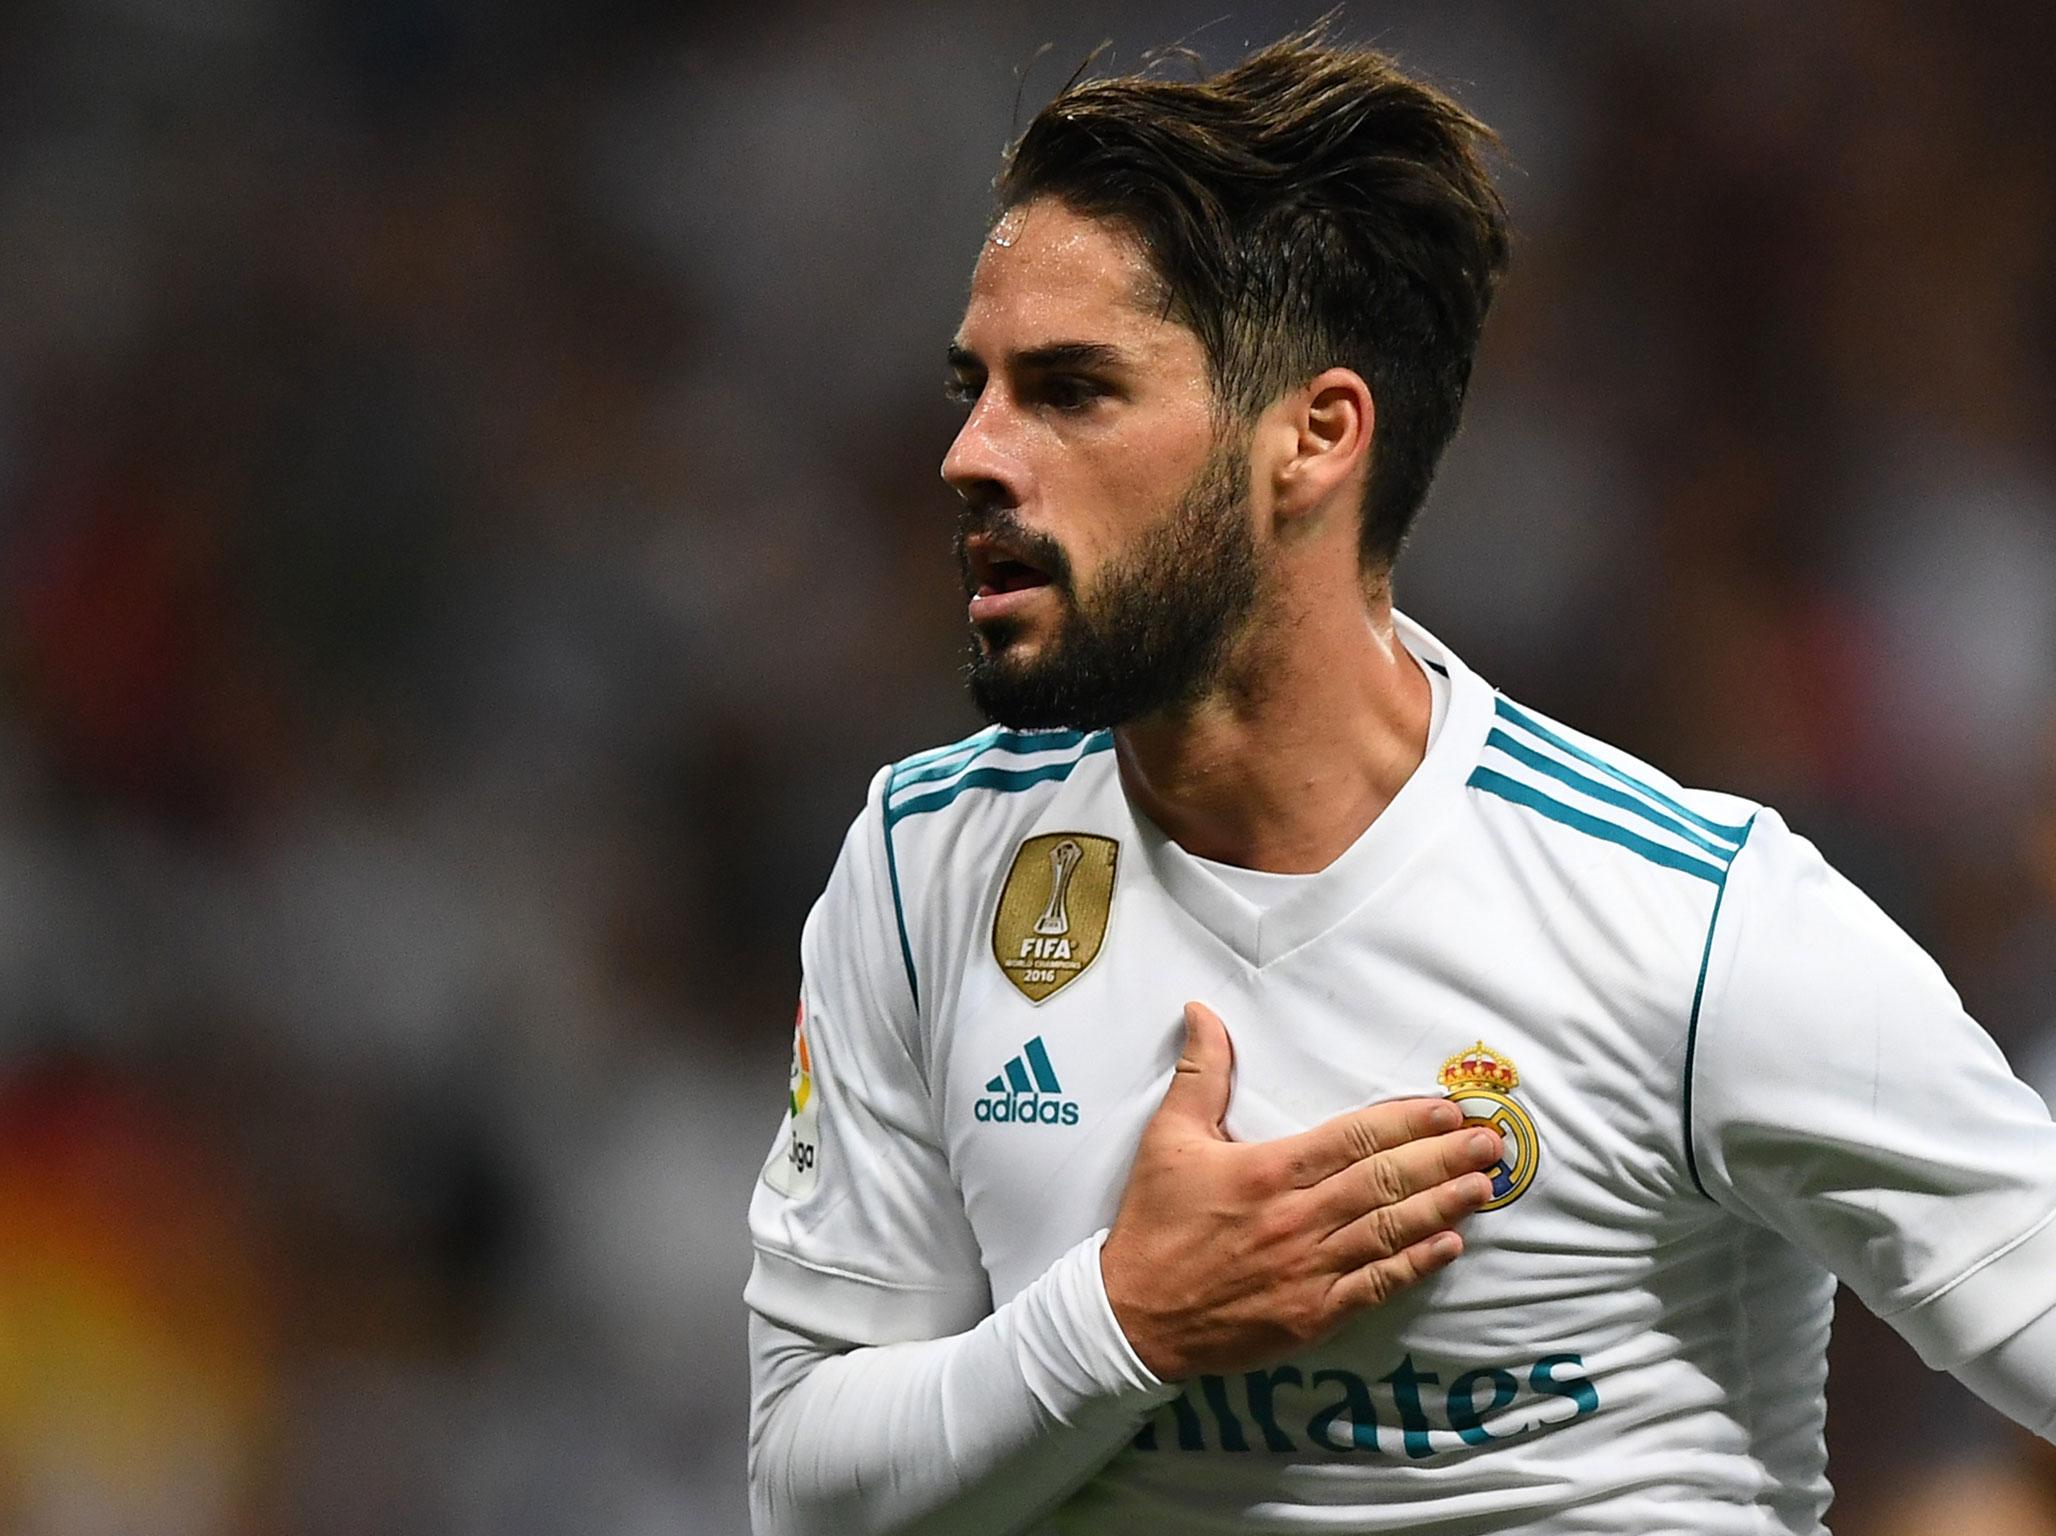 Isco scored both goals as Real Madrid earn their first home win of the season